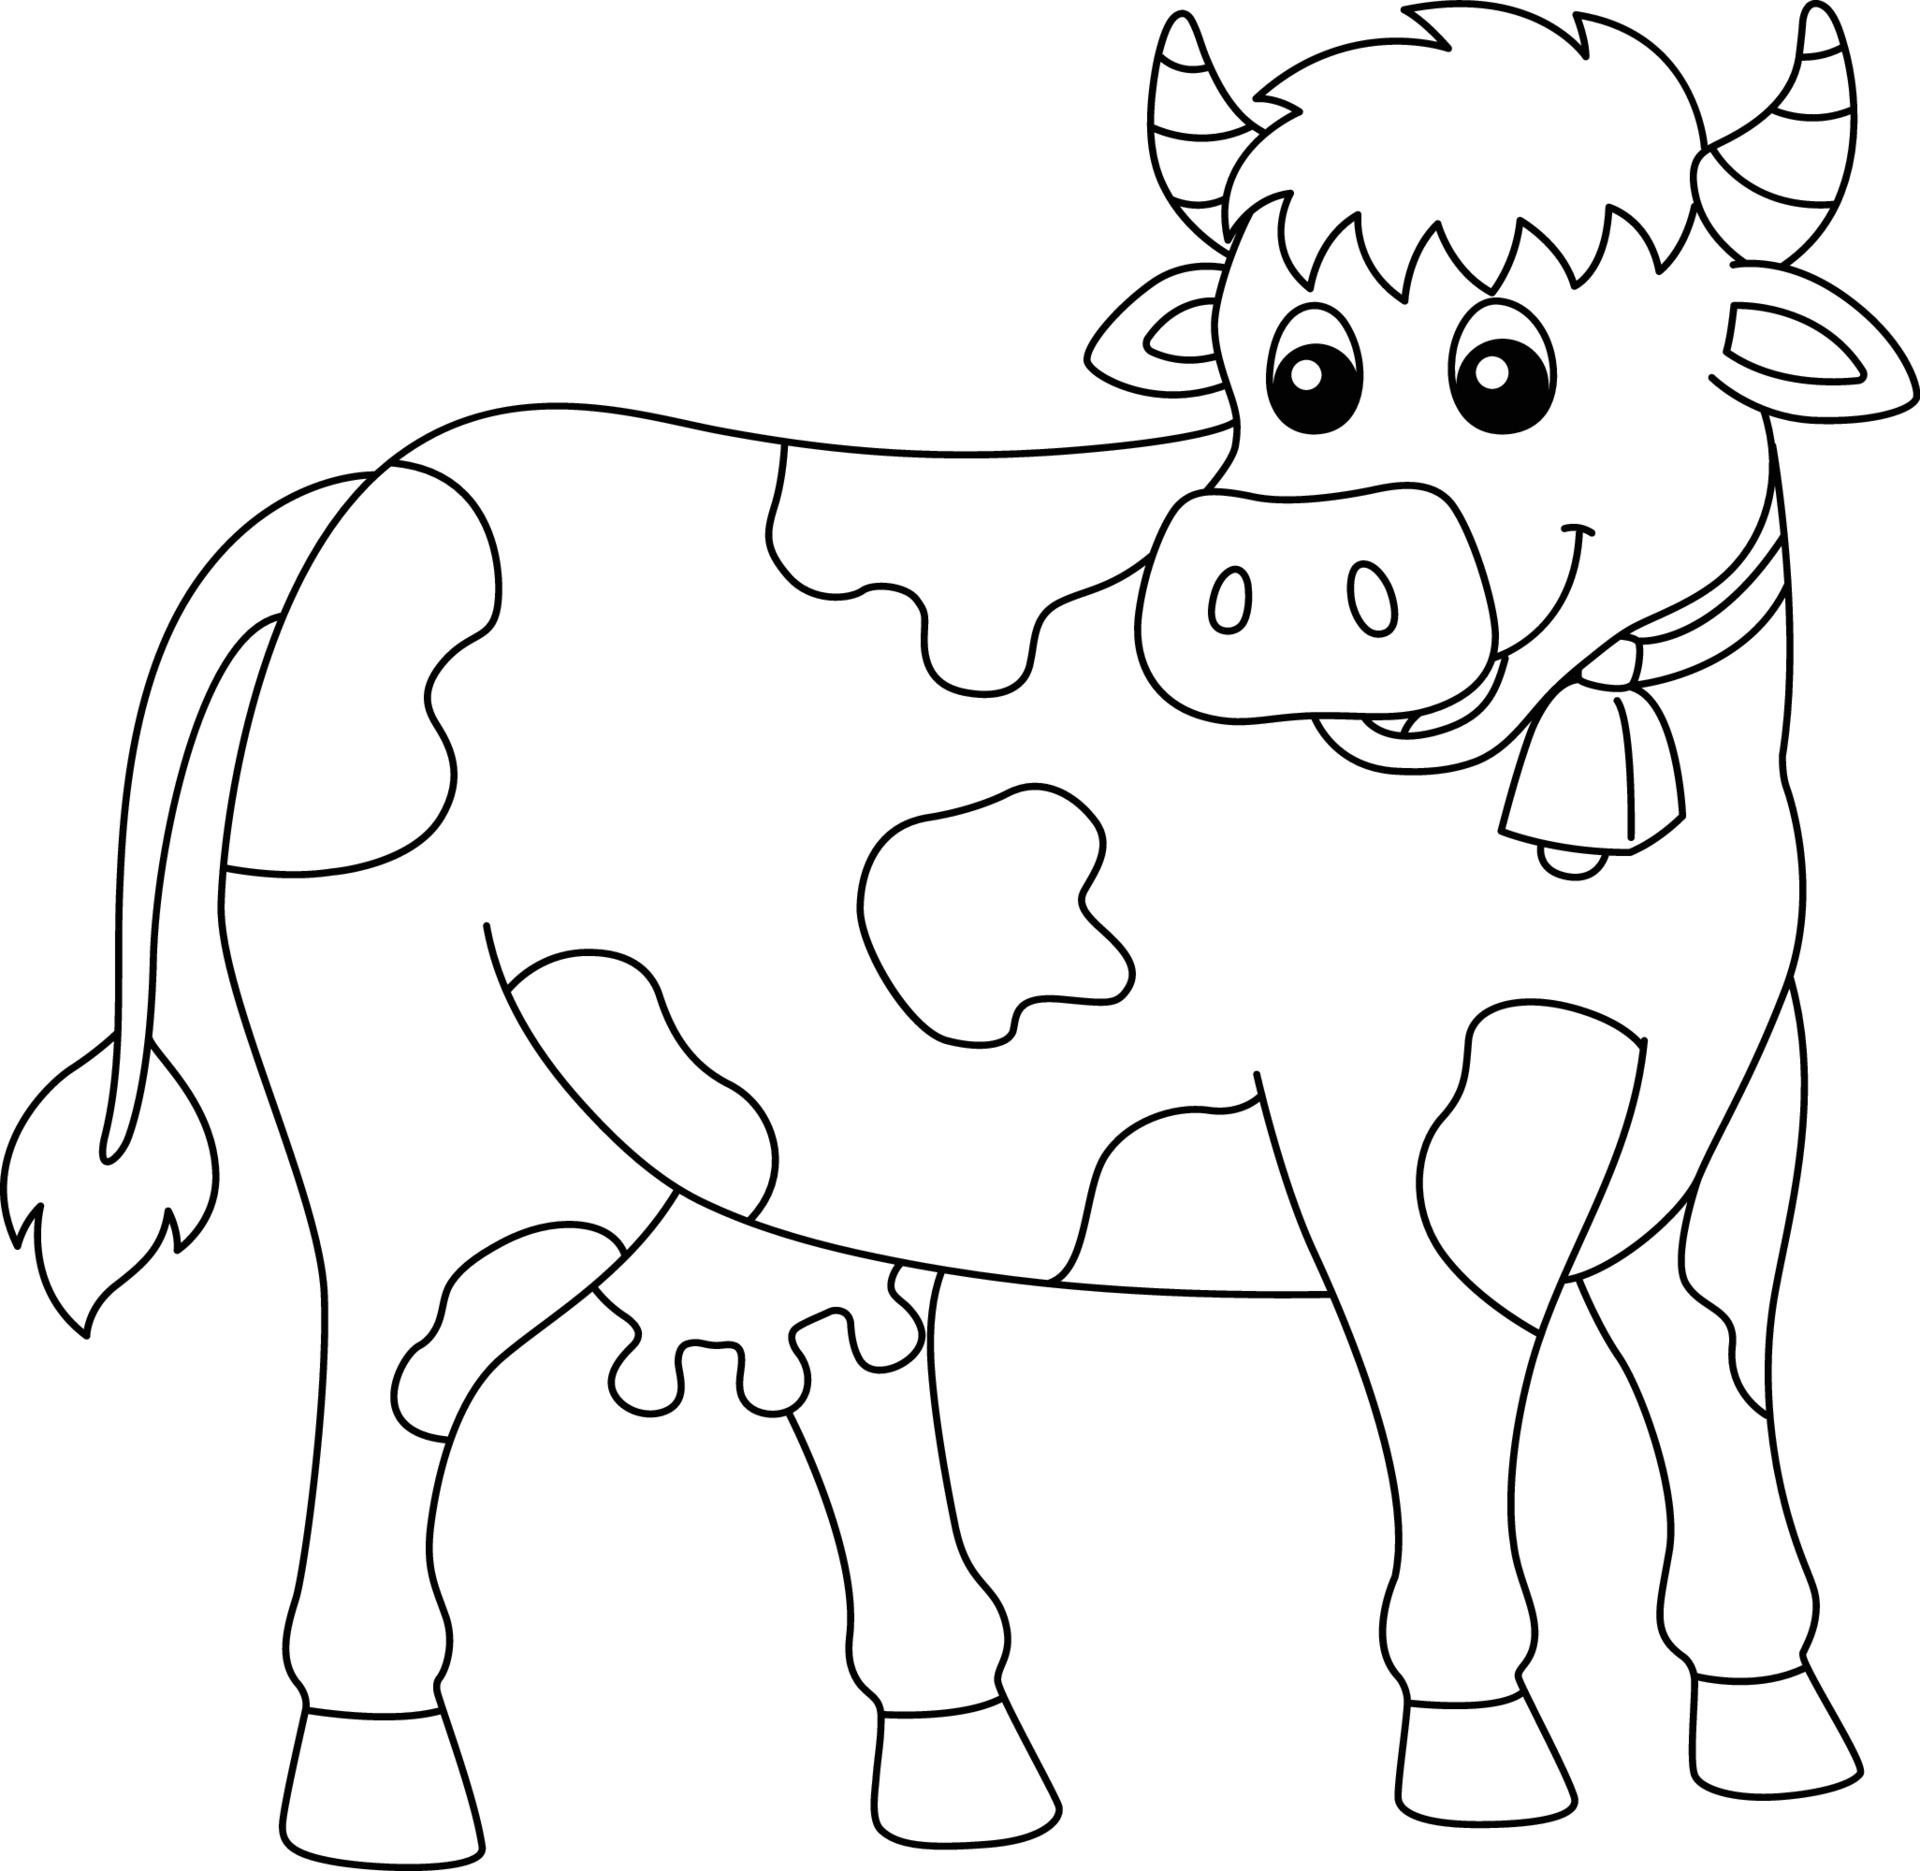 Cow Coloring Vector Art, Icons, and Graphics for Free Download